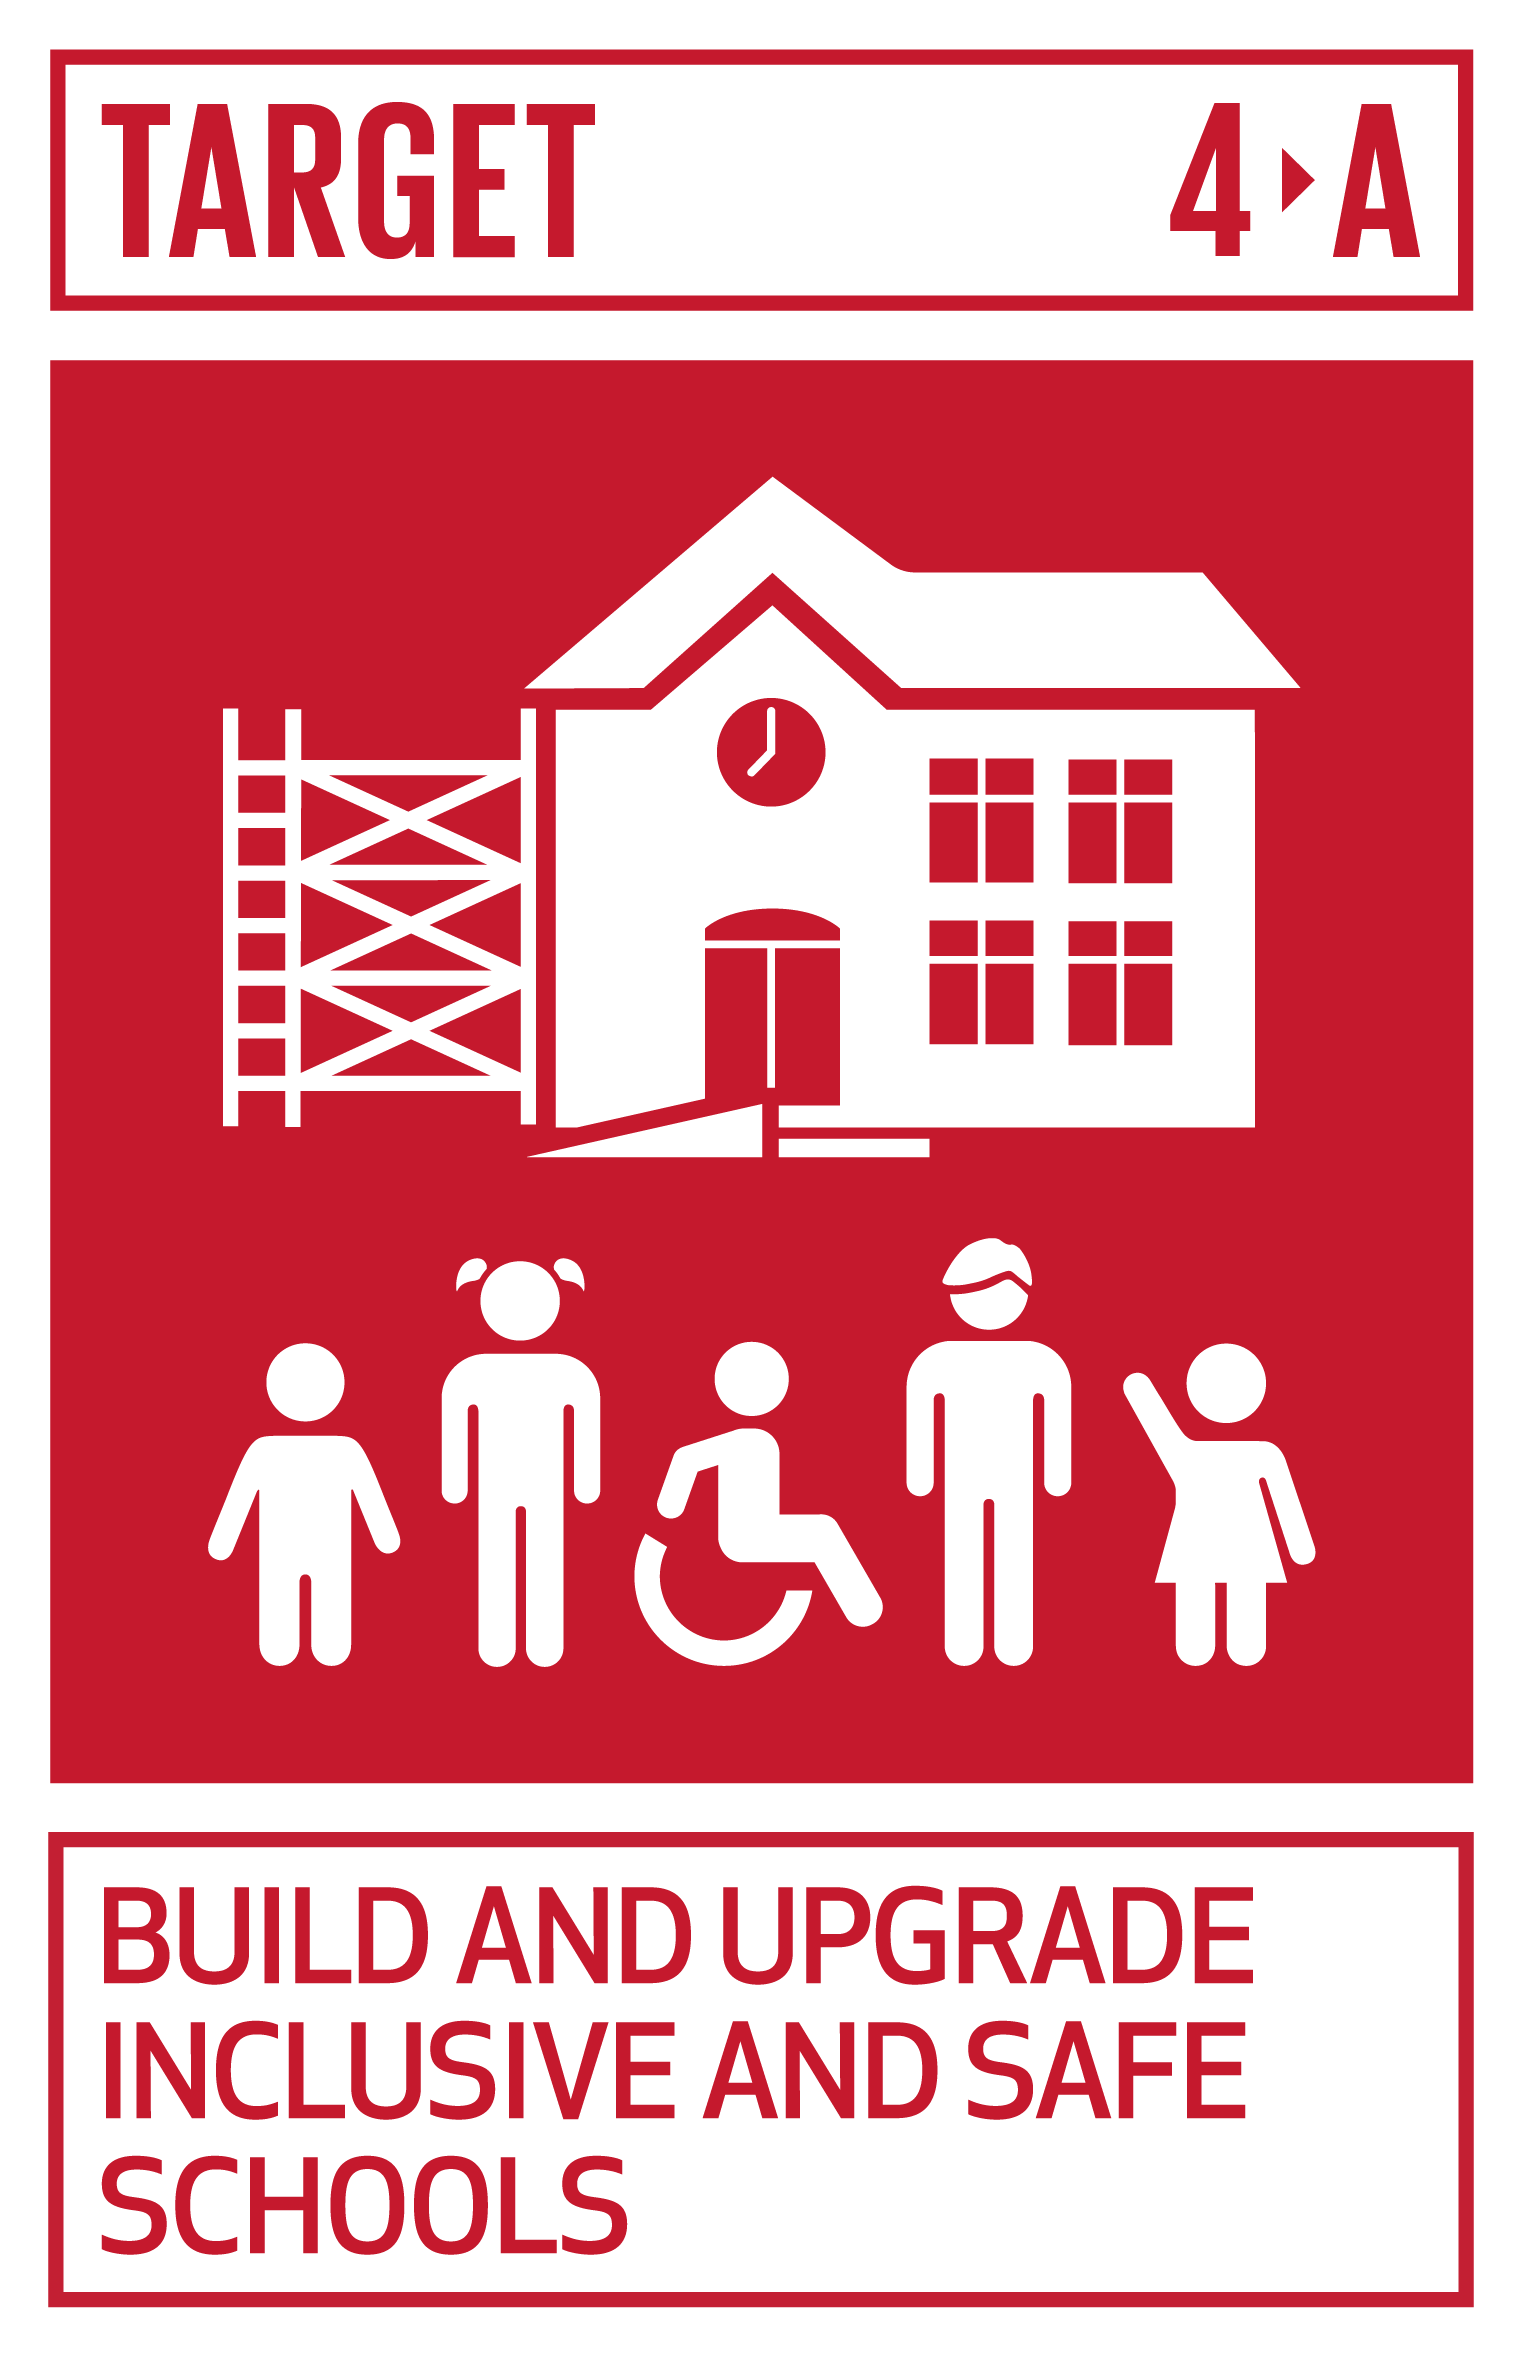 https://ocm.iccrom.org/sdgs/sdg-4-quality-education/sdg-4a-build-and-upgrade-inclusive-and-safe-schools